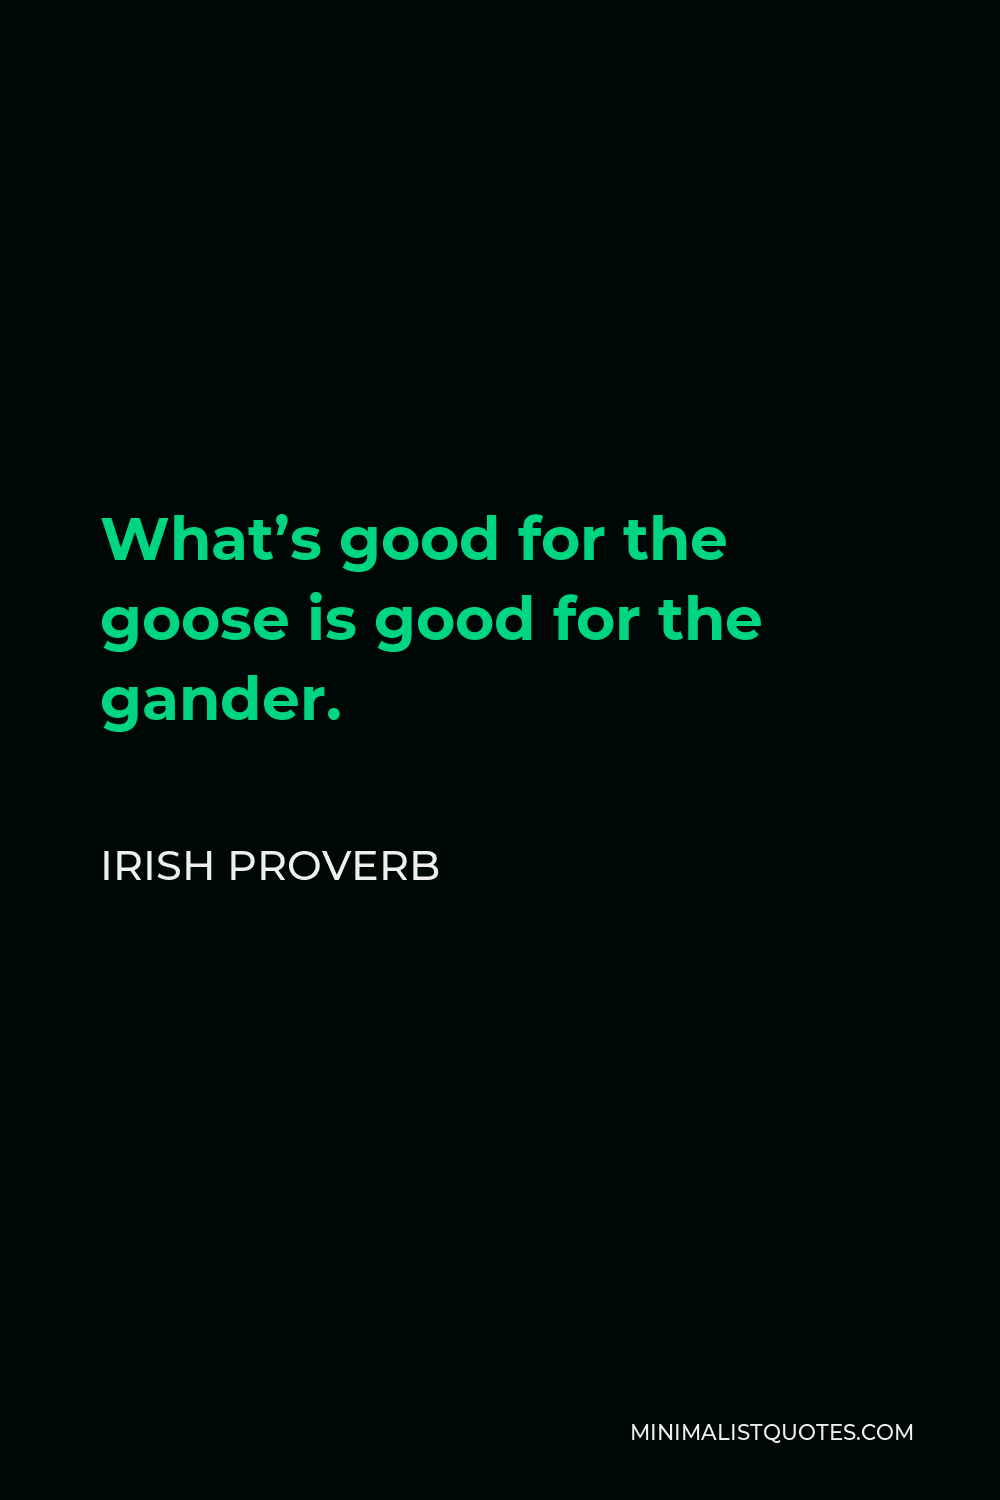 Irish Proverb Quote - What’s good for the goose is good for the gander.